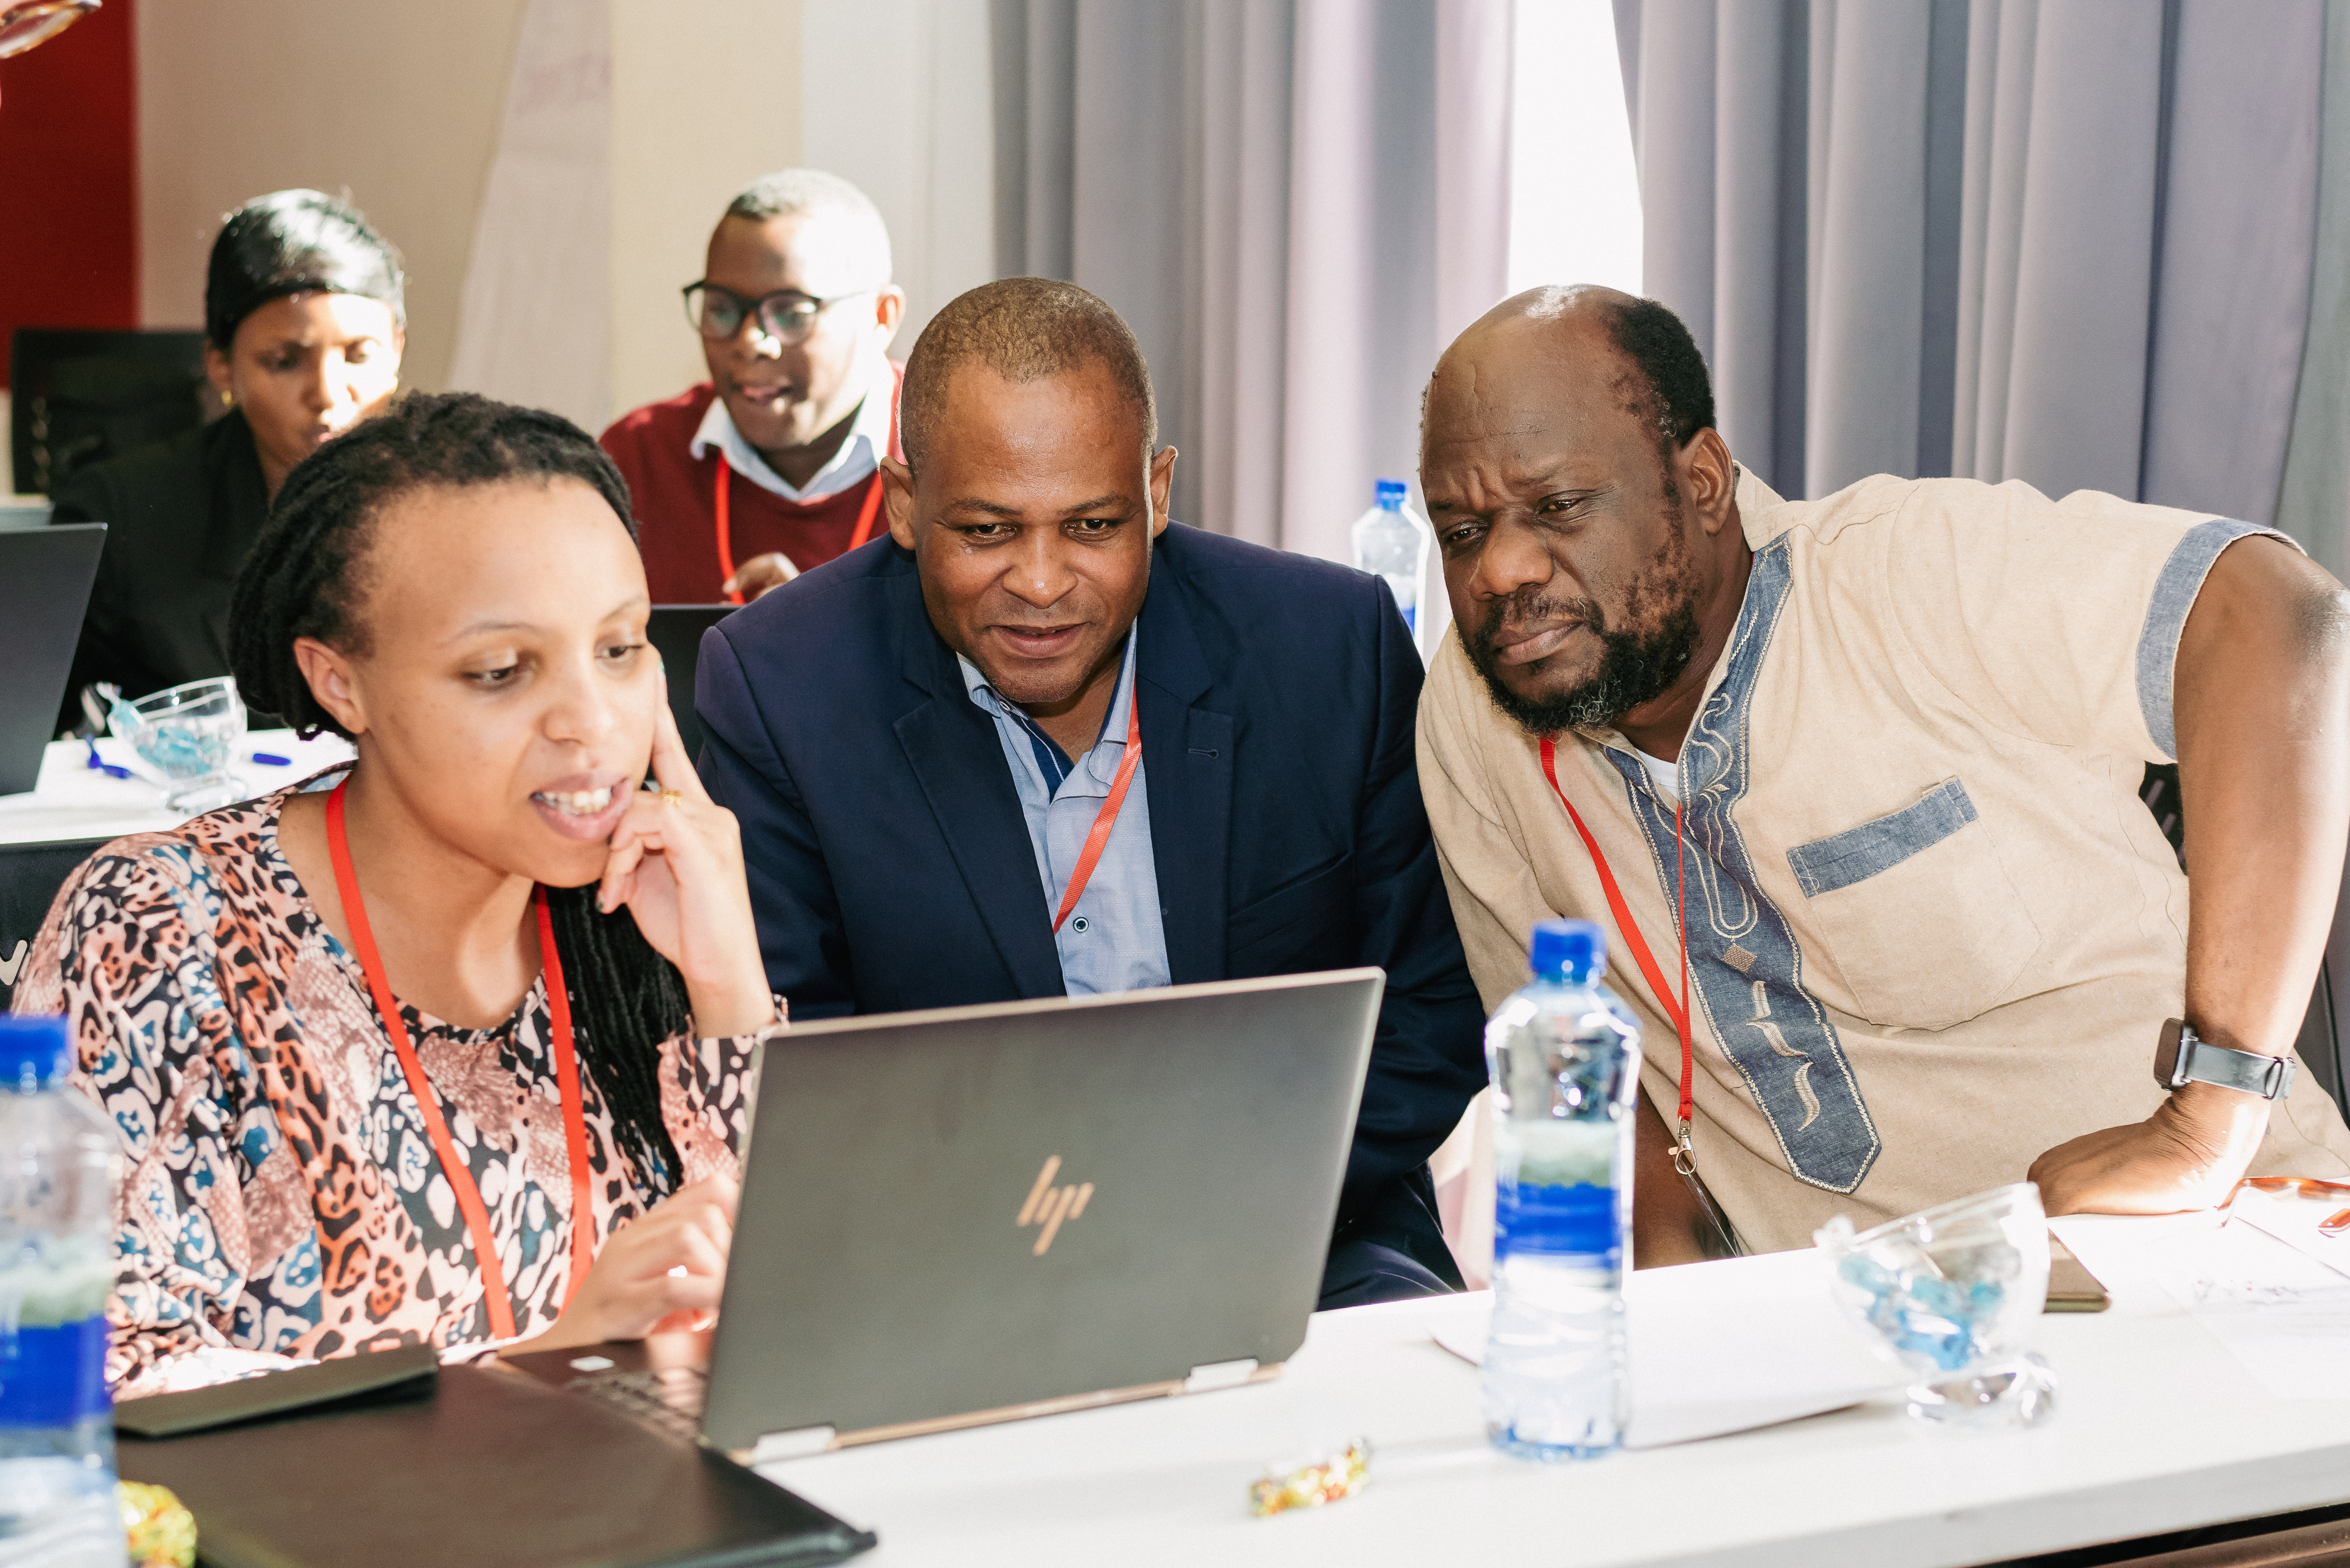 The East African follow-up workshop allowed for in-depth technical discussions on practical aspects around tax expenditures with regional partners and international experts, peer-learning, and networking opportunities.